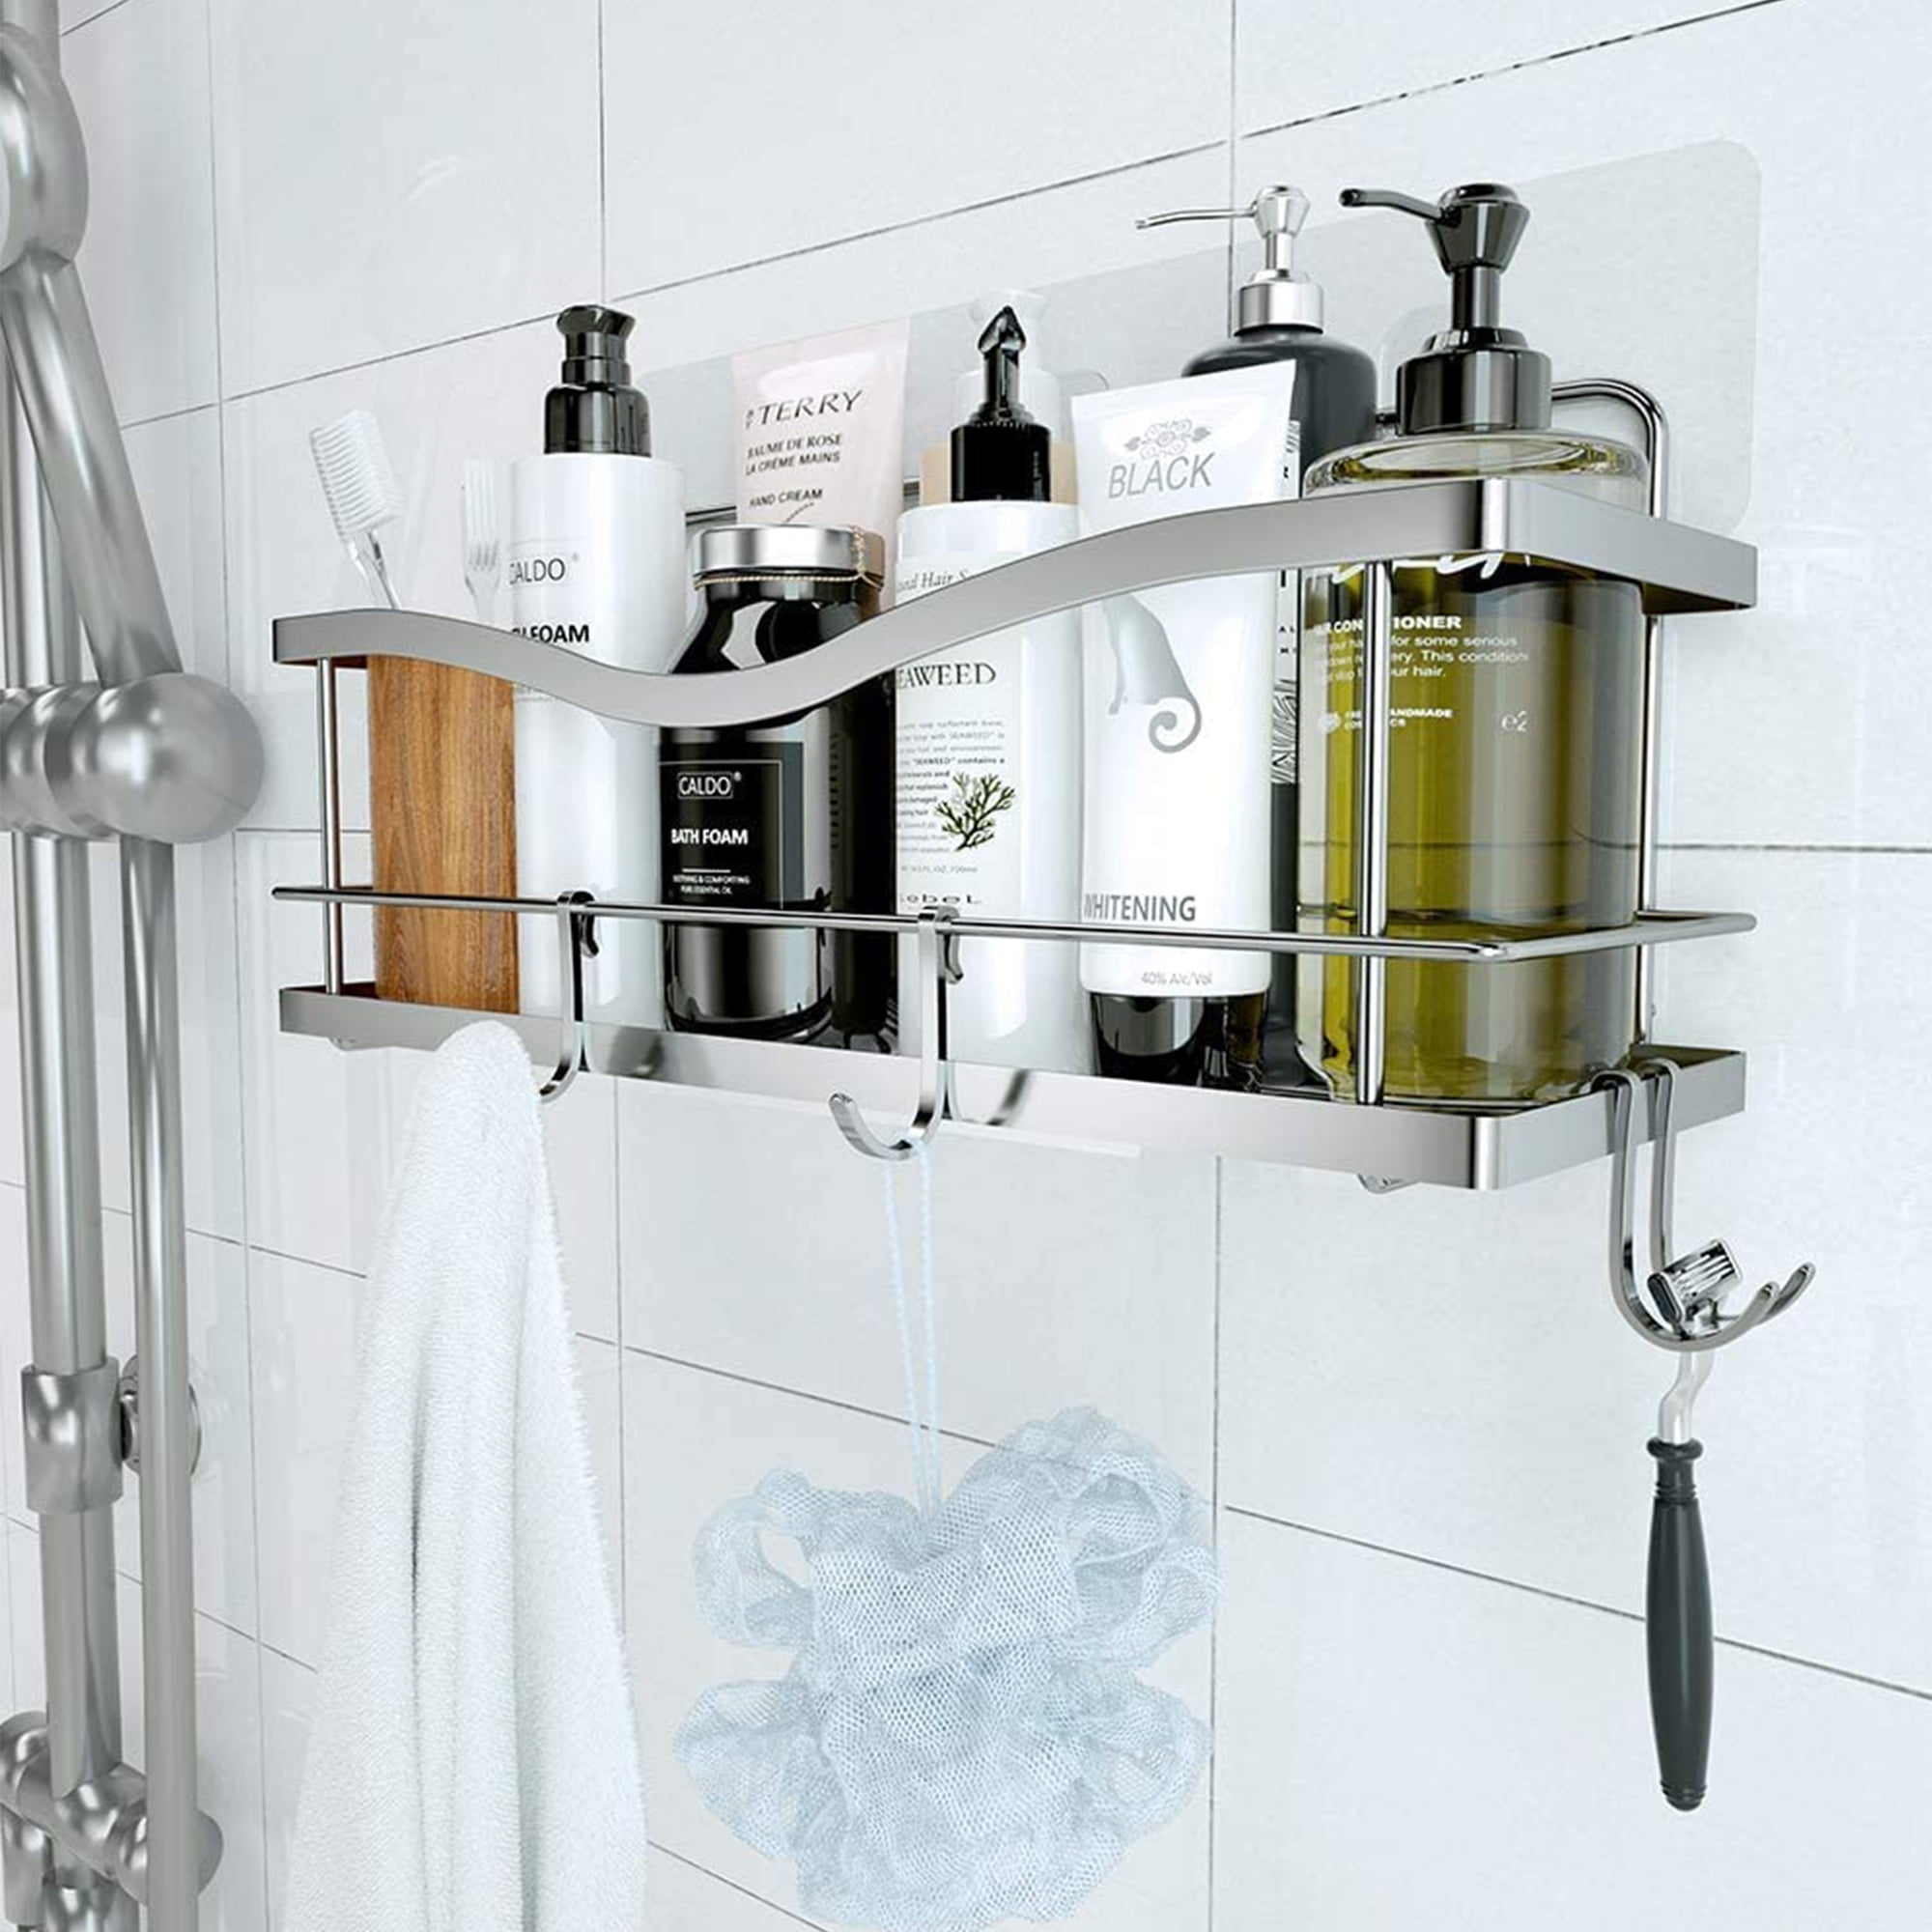 KINCMAX Shower Shelves 2-Pack - Self Adhesive Caddy with 4 Hooks - No Drill  Large Capacity Stainless Steel Wall Shelf - Aesthetic Organizer for Inside